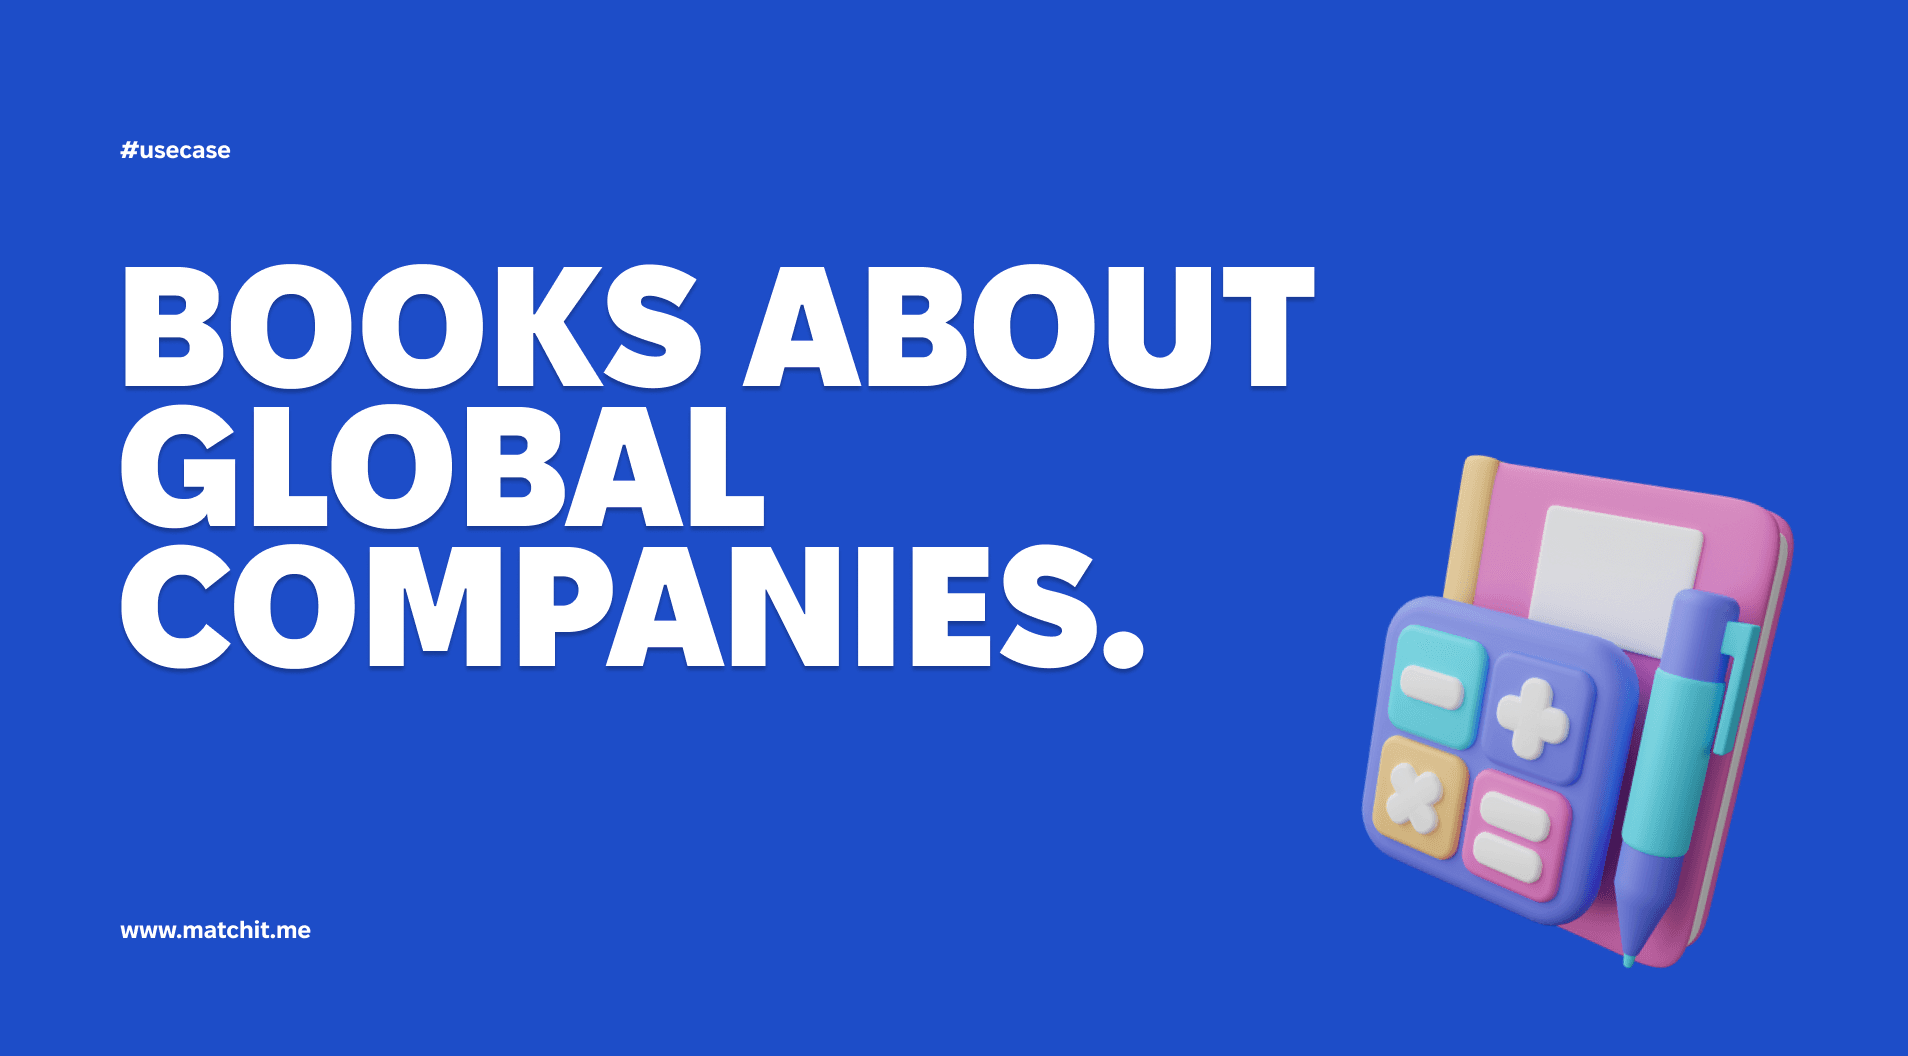 Books about global companies.